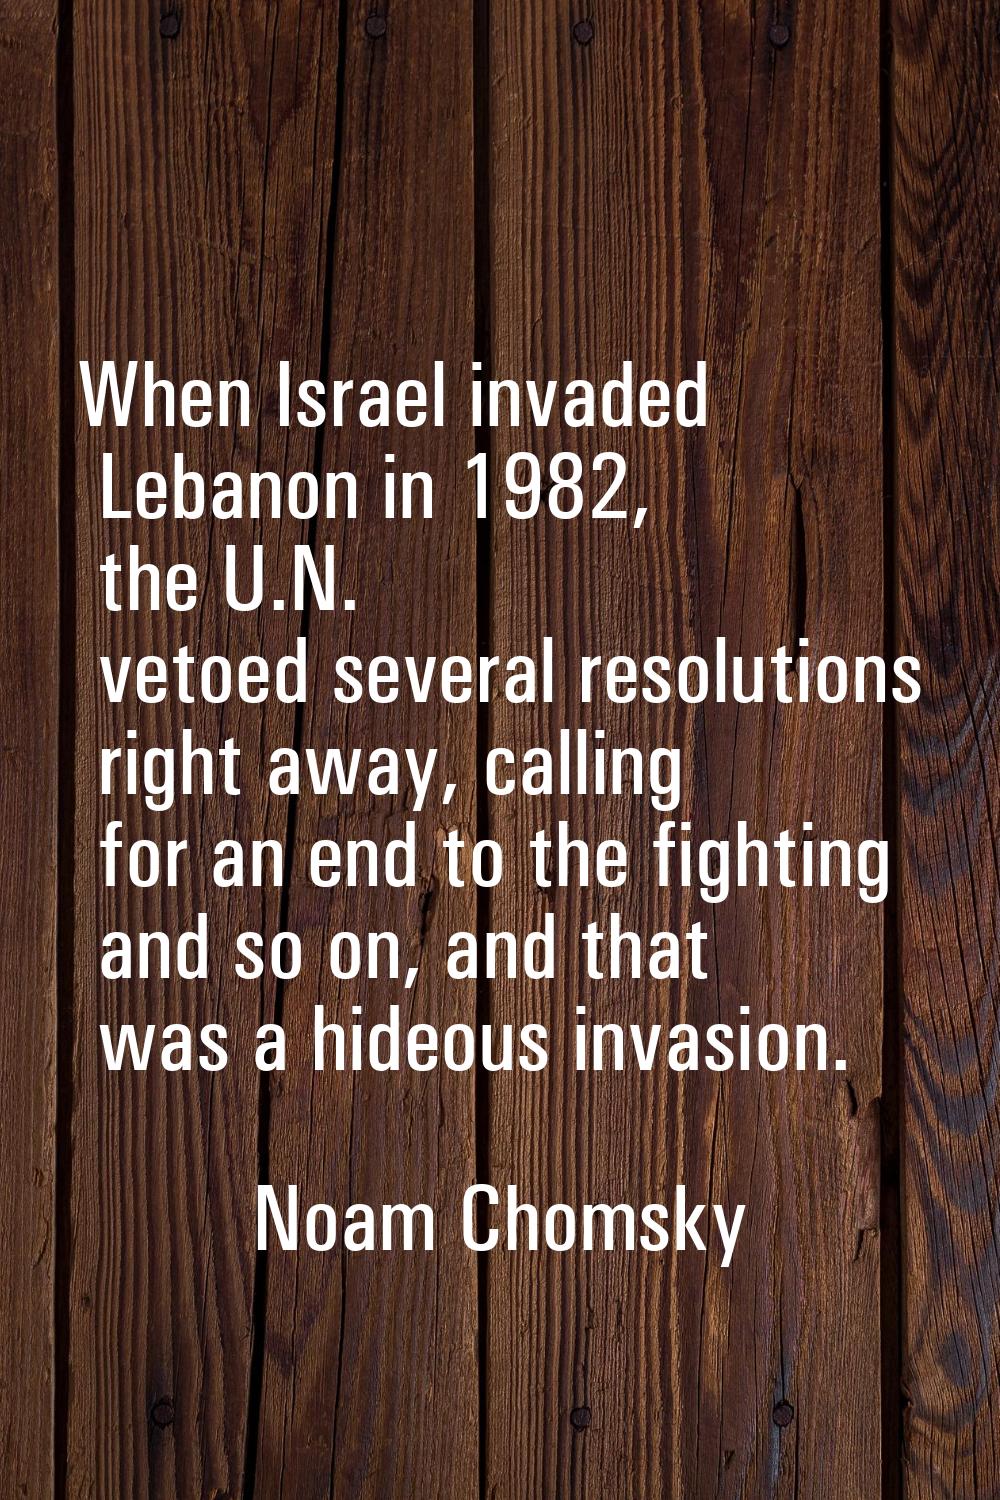 When Israel invaded Lebanon in 1982, the U.N. vetoed several resolutions right away, calling for an